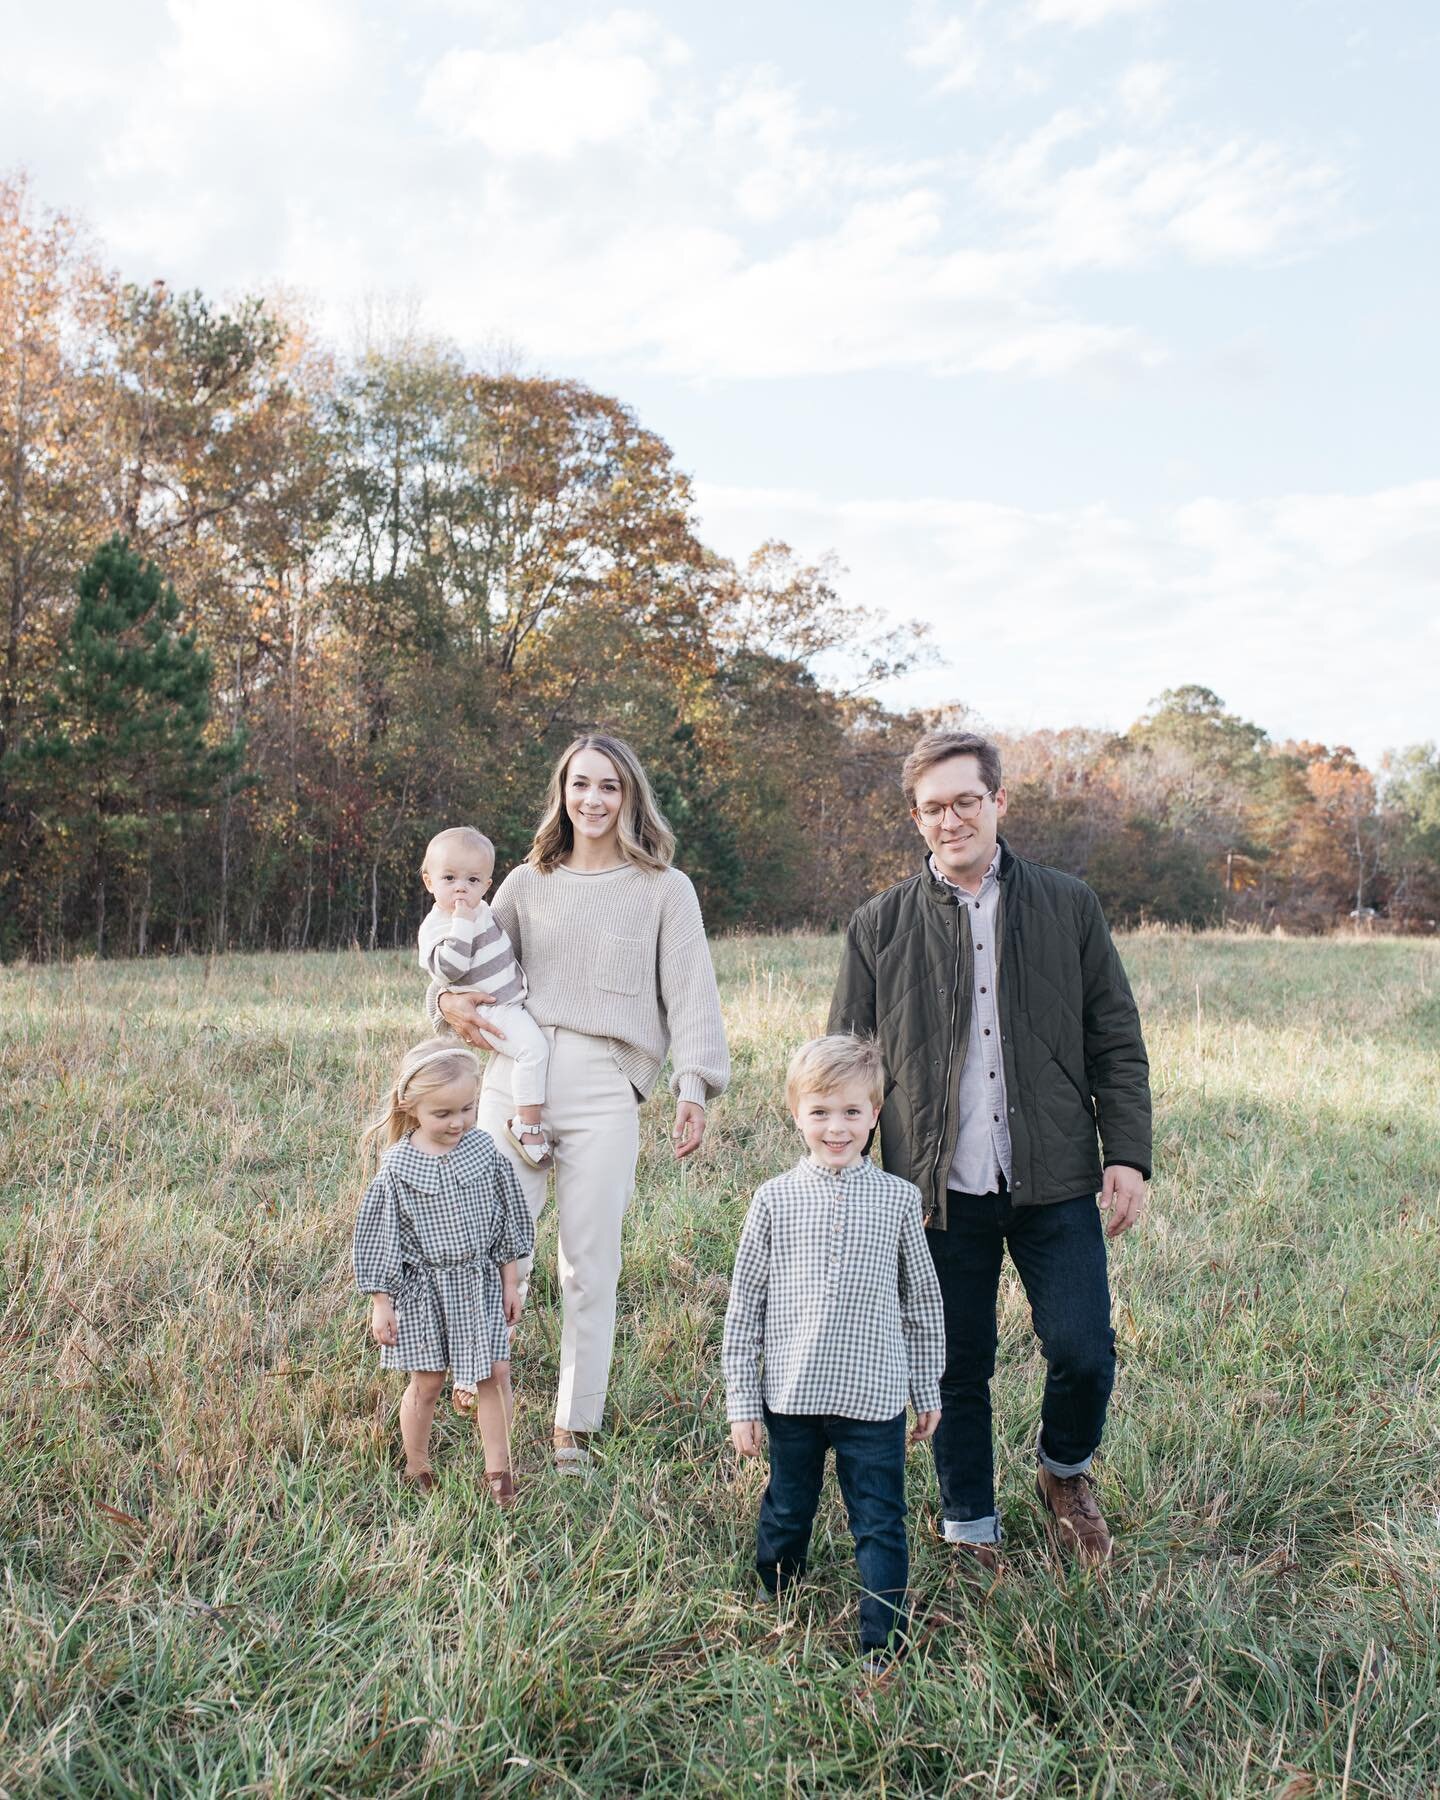 Happy Thanksgiving from my family to yours! 🦃

Photo: @morganbeatton